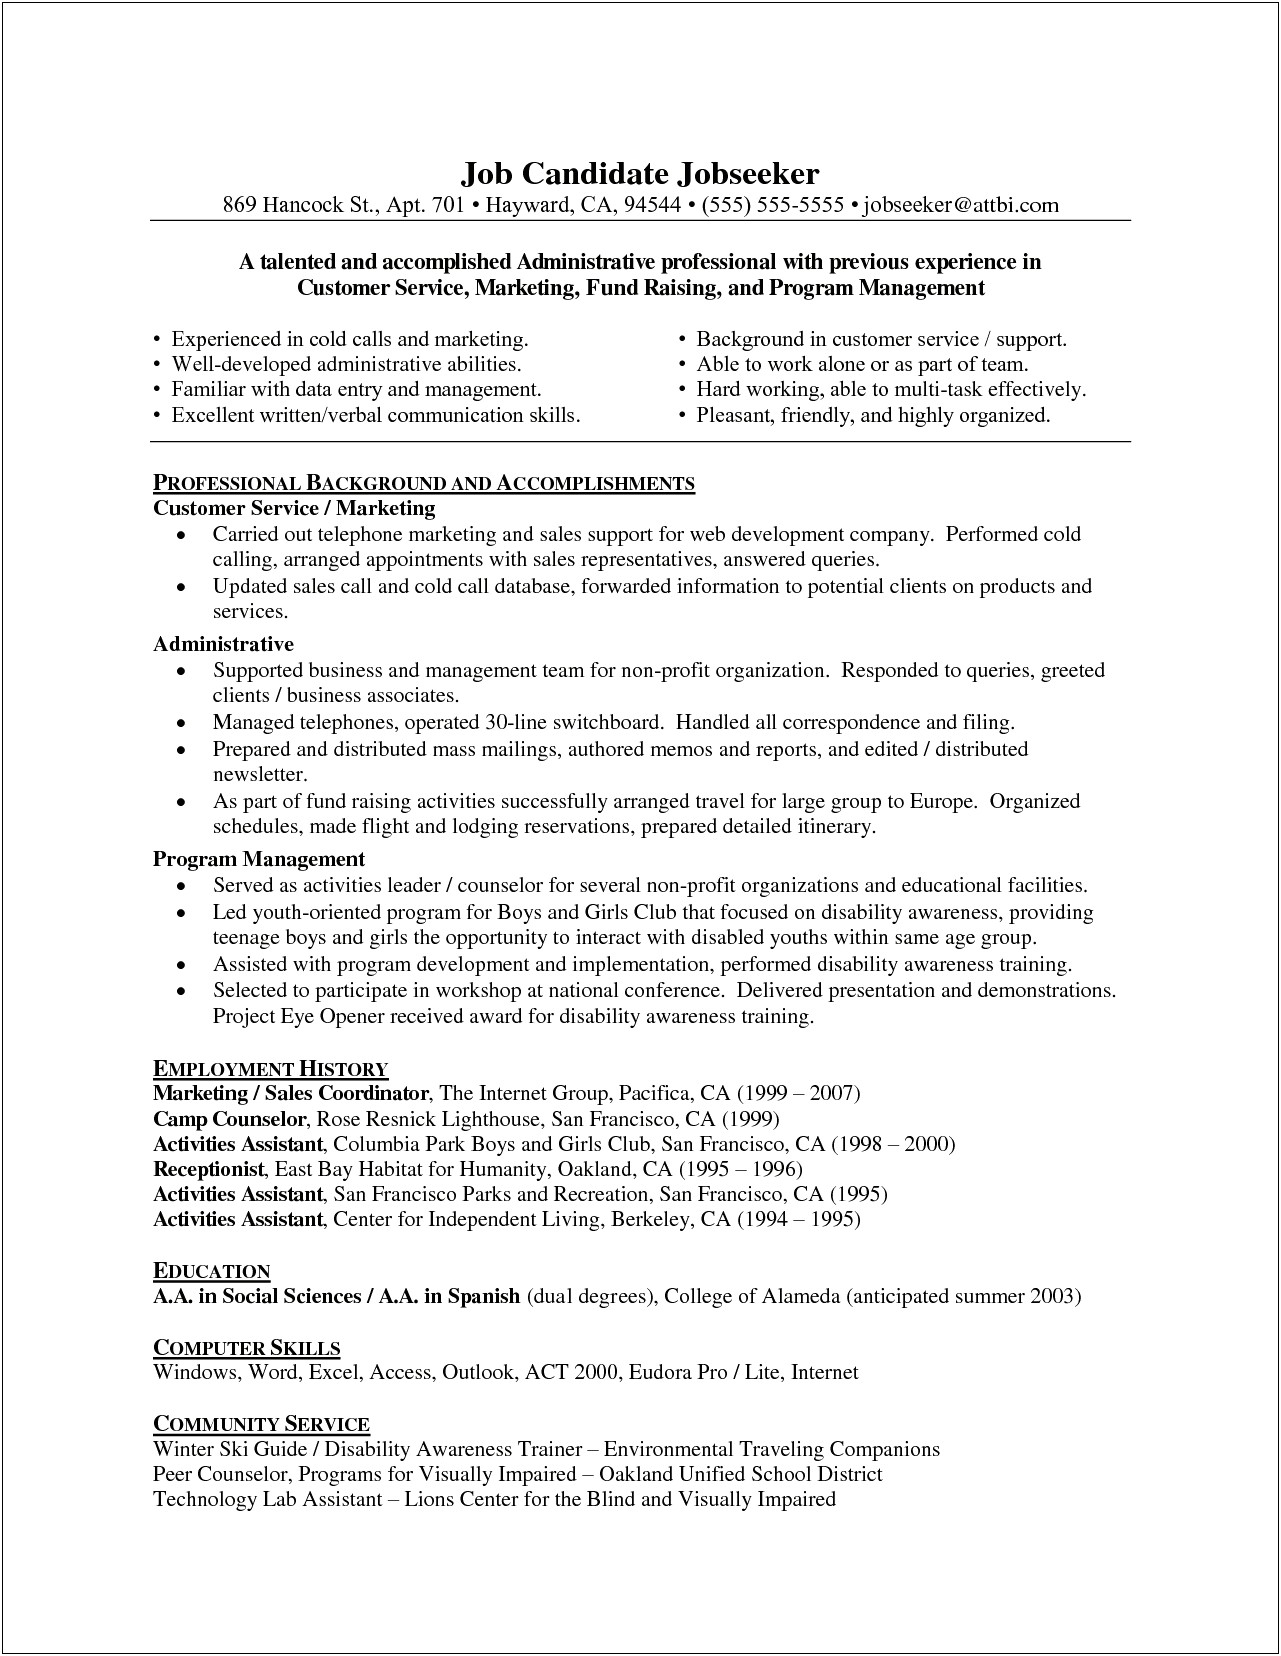 Resume Template For Customer Service Assistant